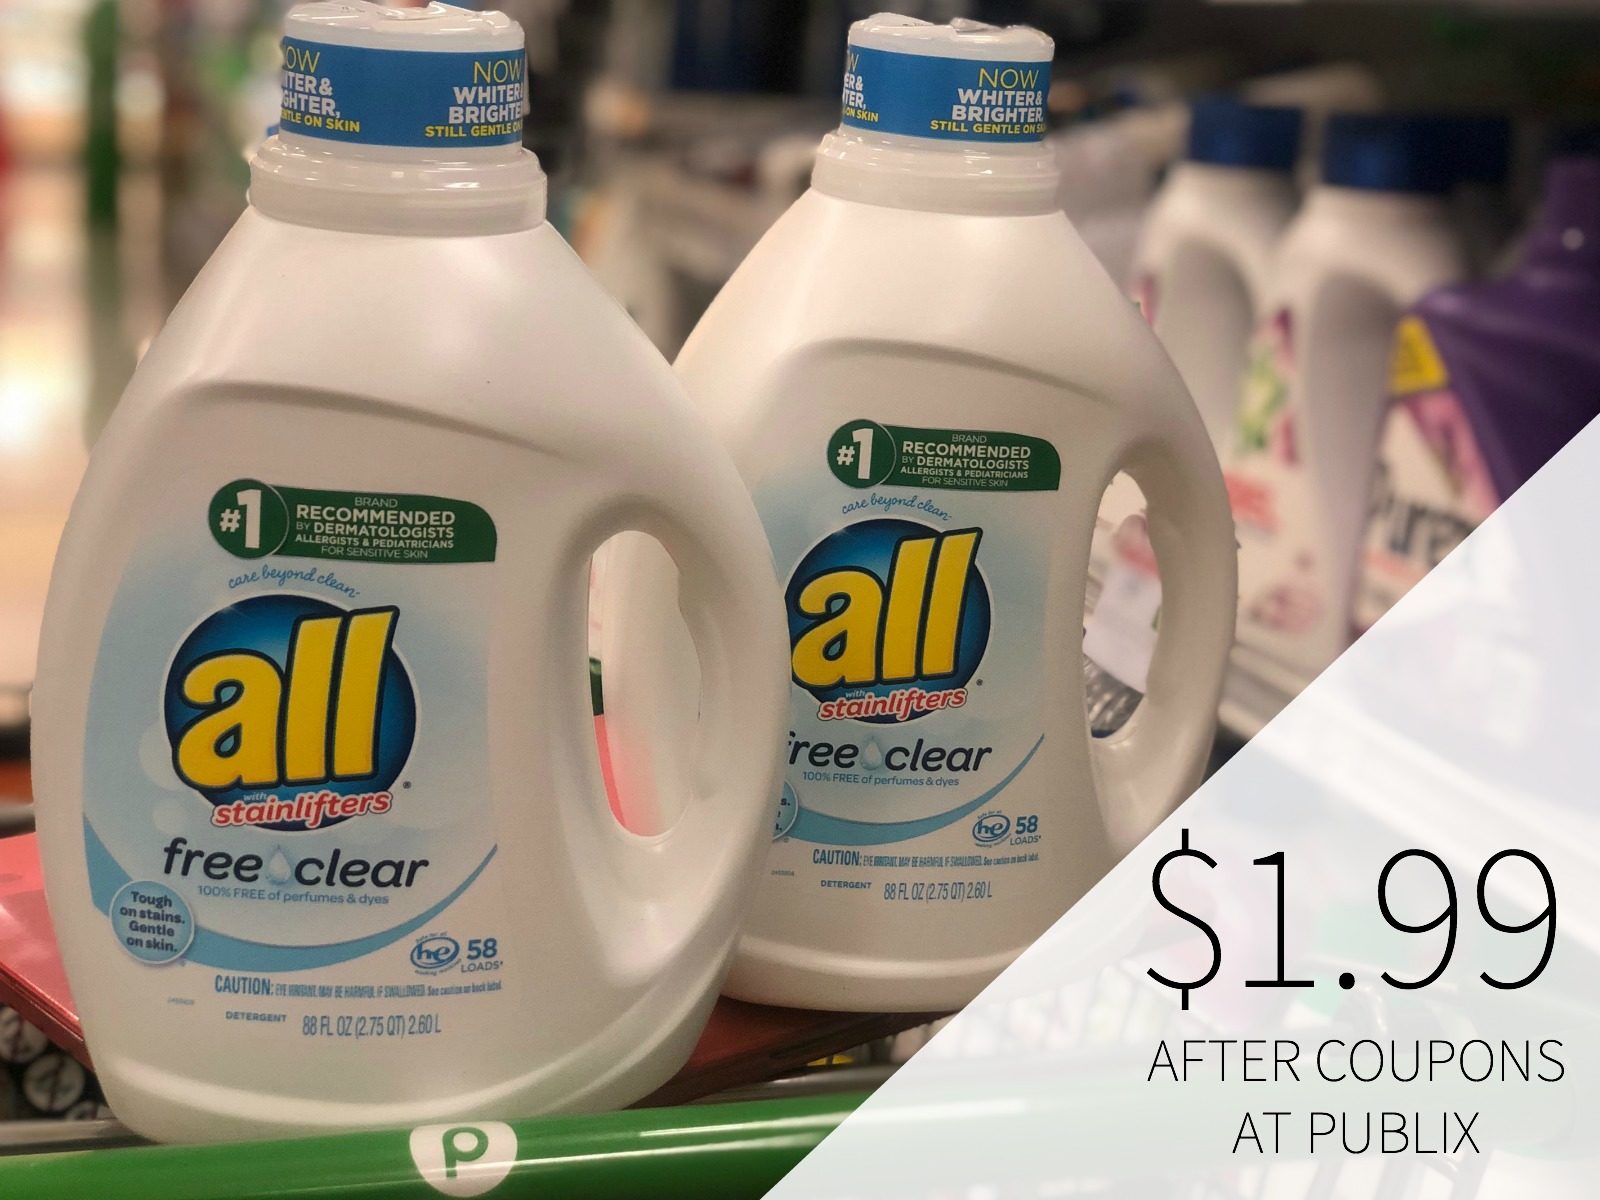 Big Bottles Of All Laundry Detergent Just $1.99 At Publix (Approximately 4¢ Per Load) on I Heart Publix 1